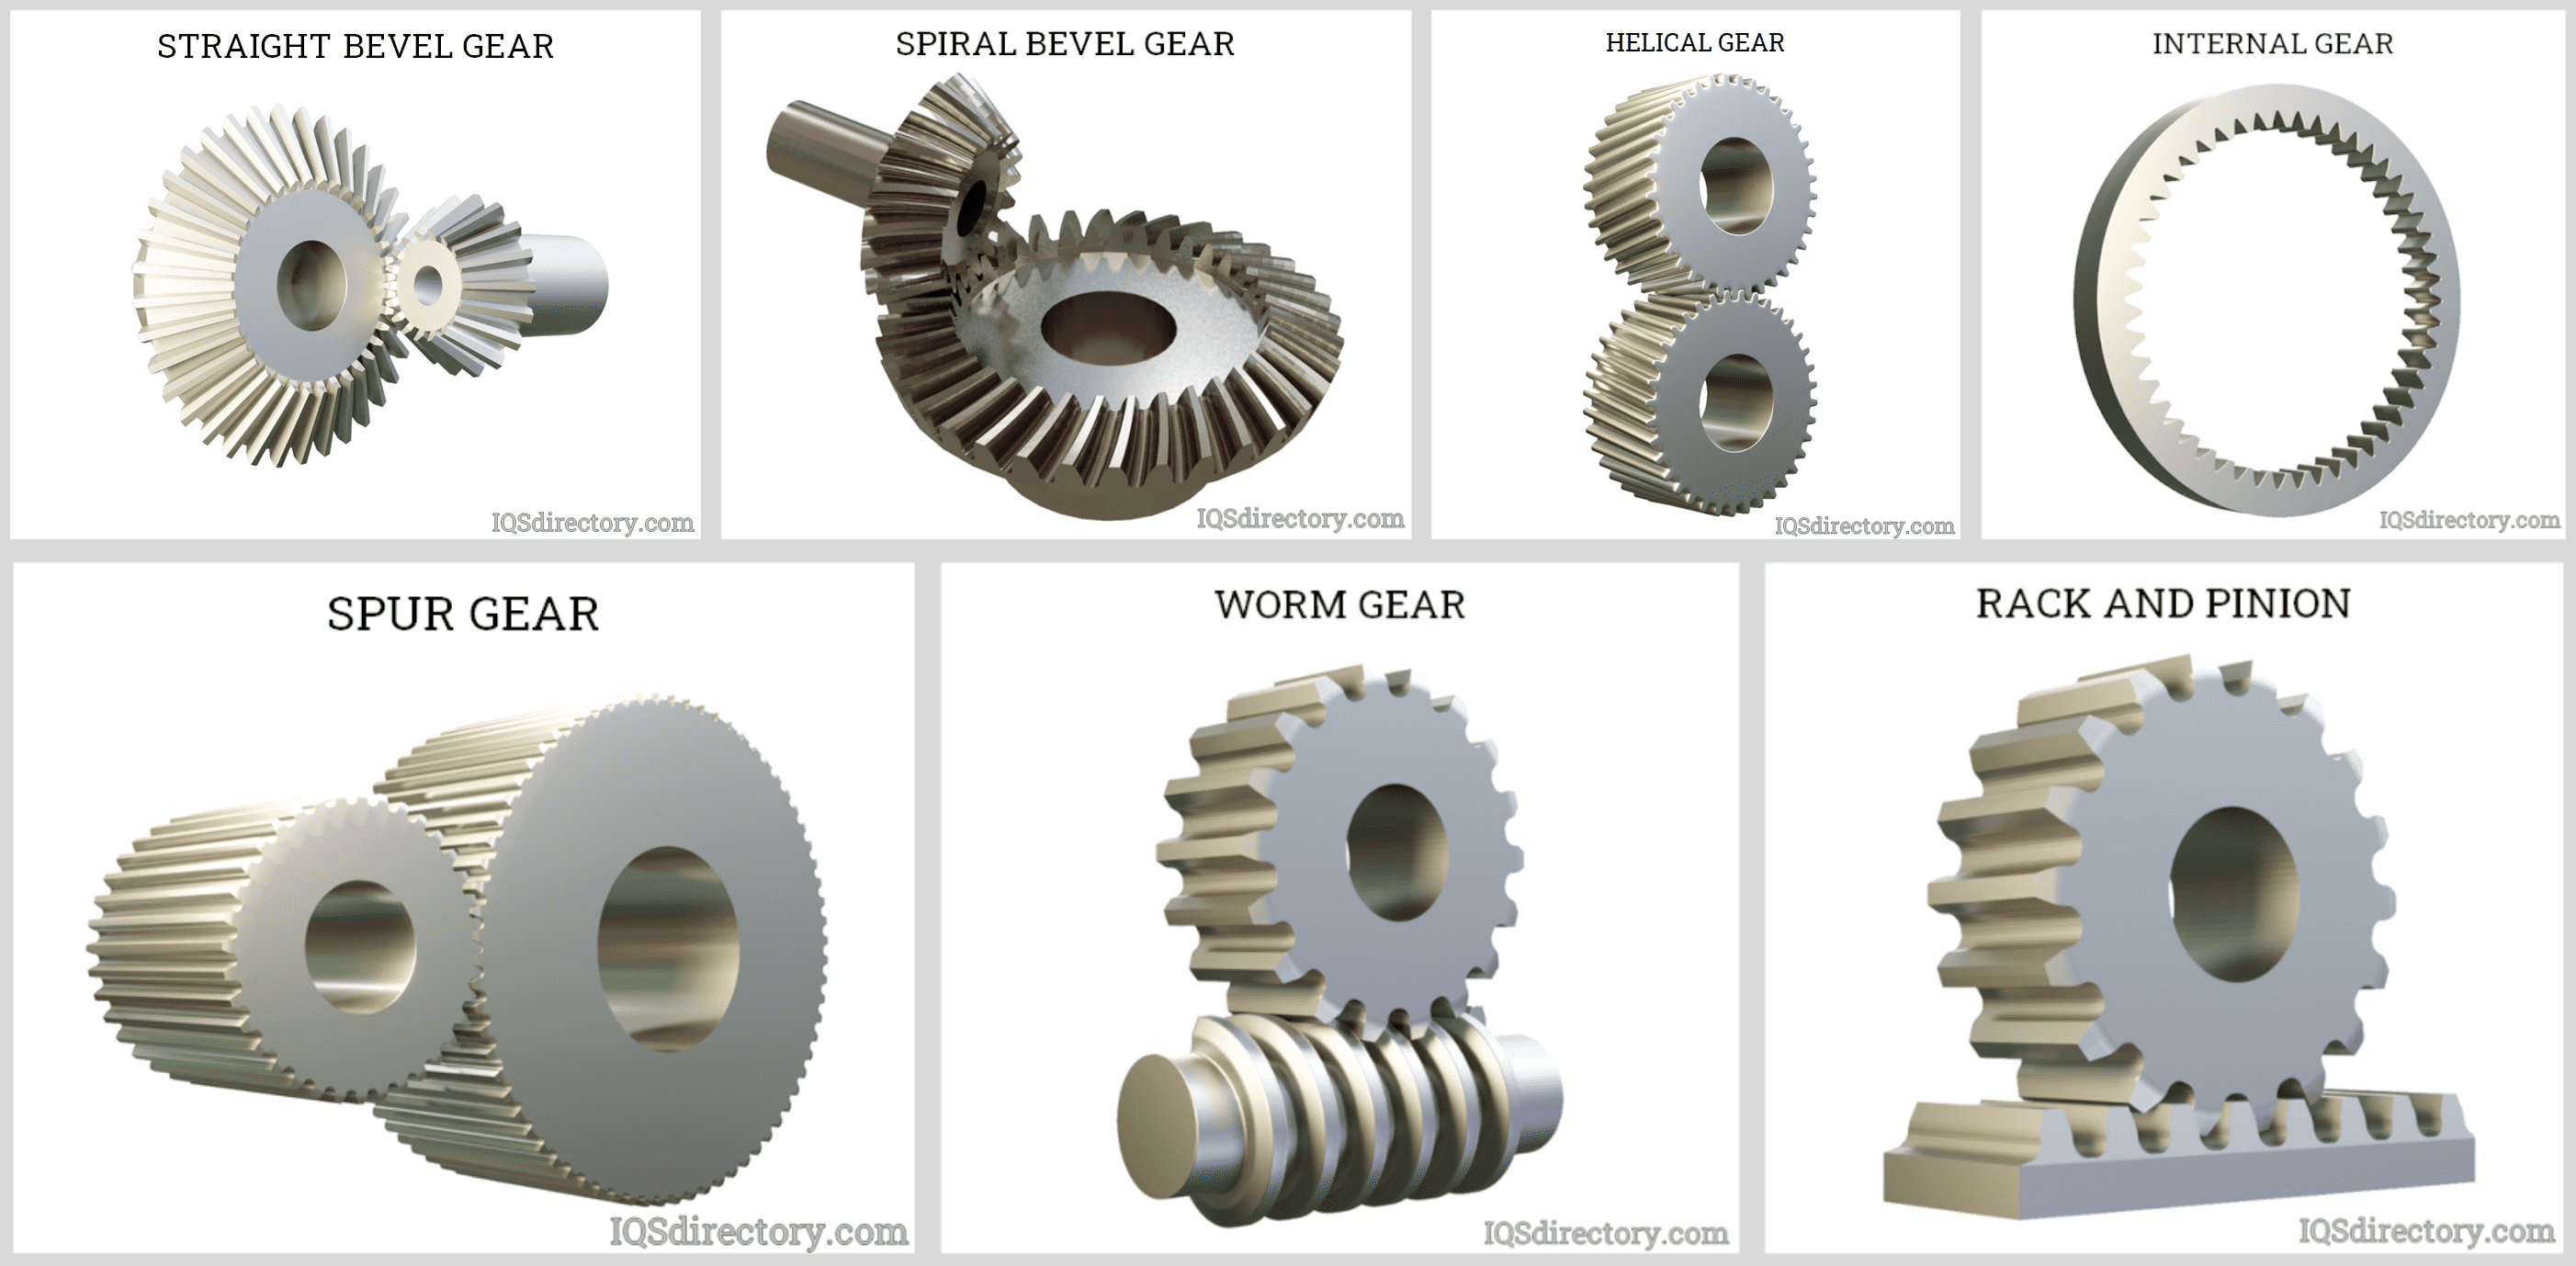 Bevel Gear: What Is It? How Does It Work? Types, Uses